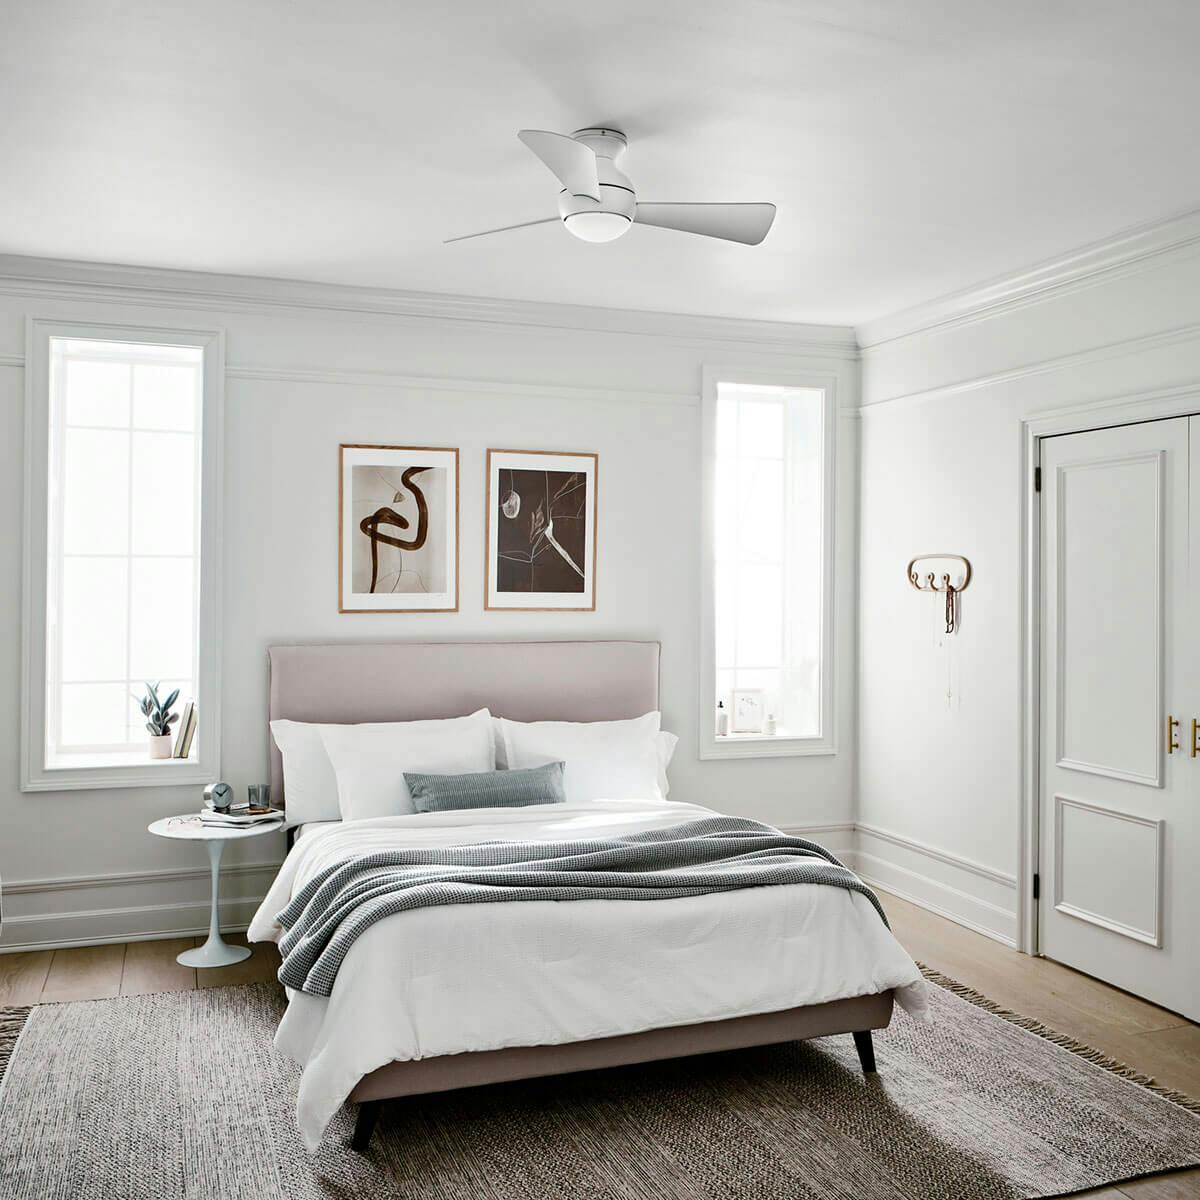 Day timebedroom image featuring Sola 330151MWH